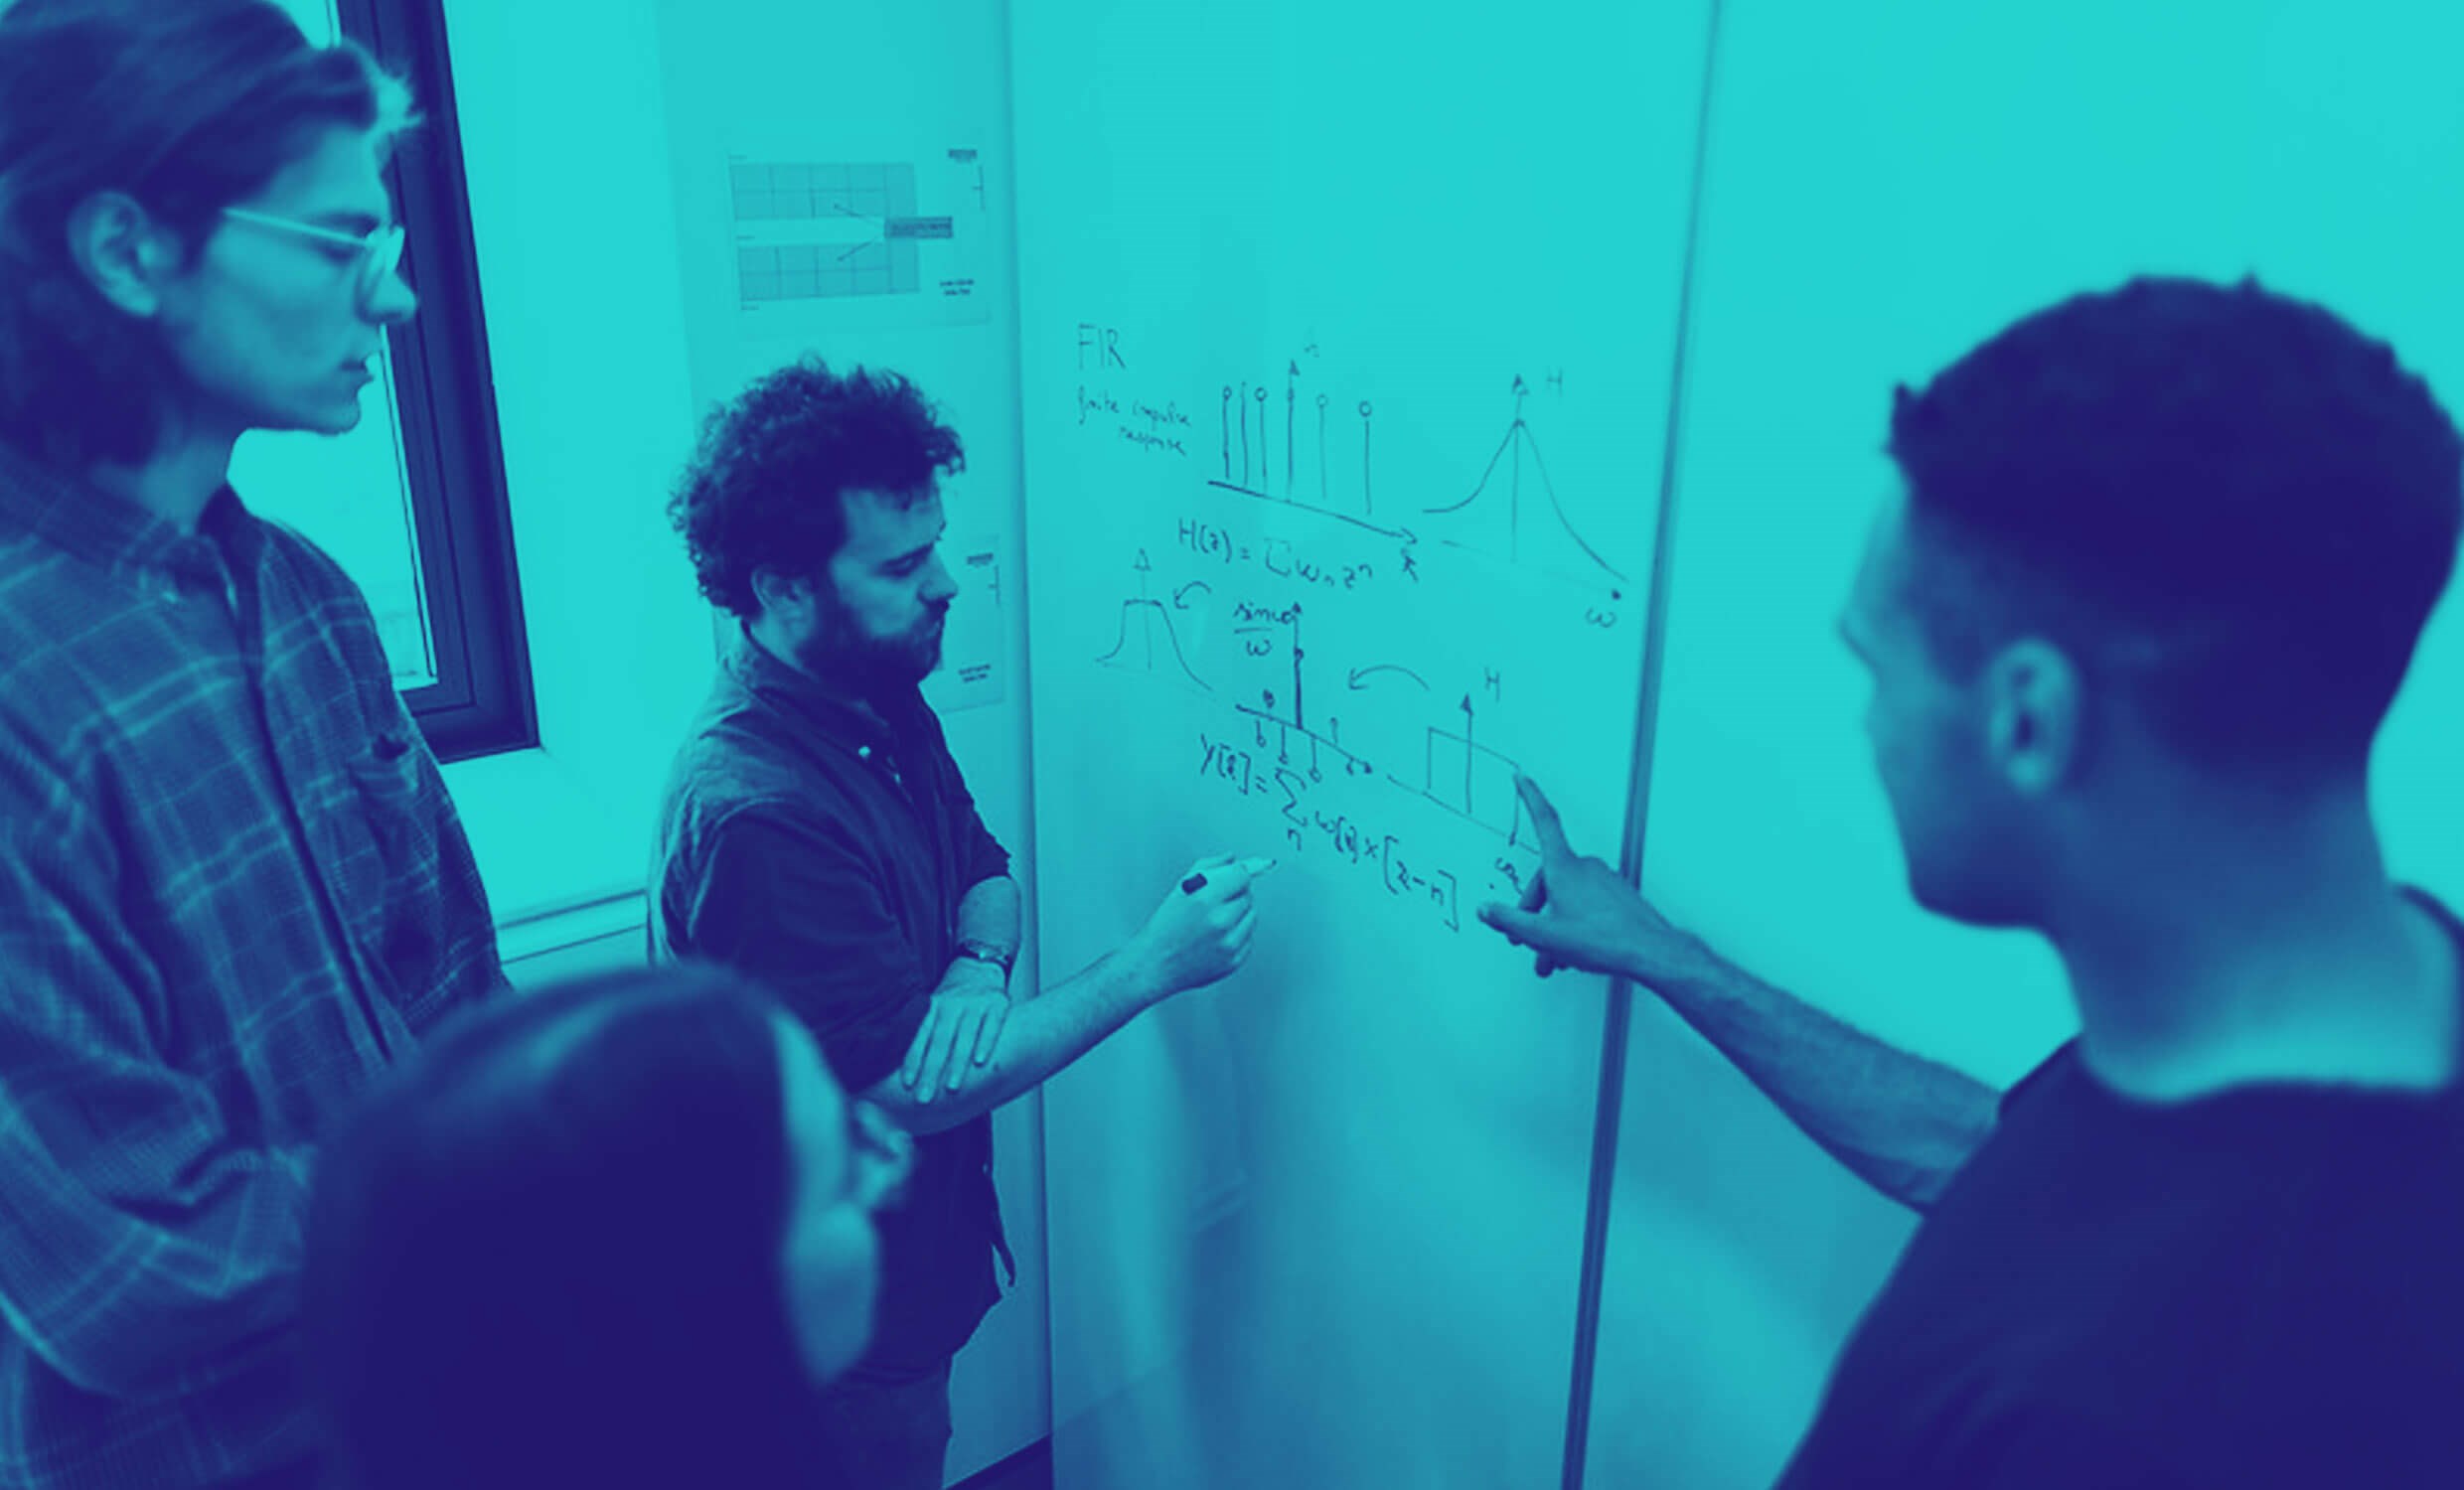 Four engineers are standing in front of a whiteboard, engaged in technical discussions over technical sketches.